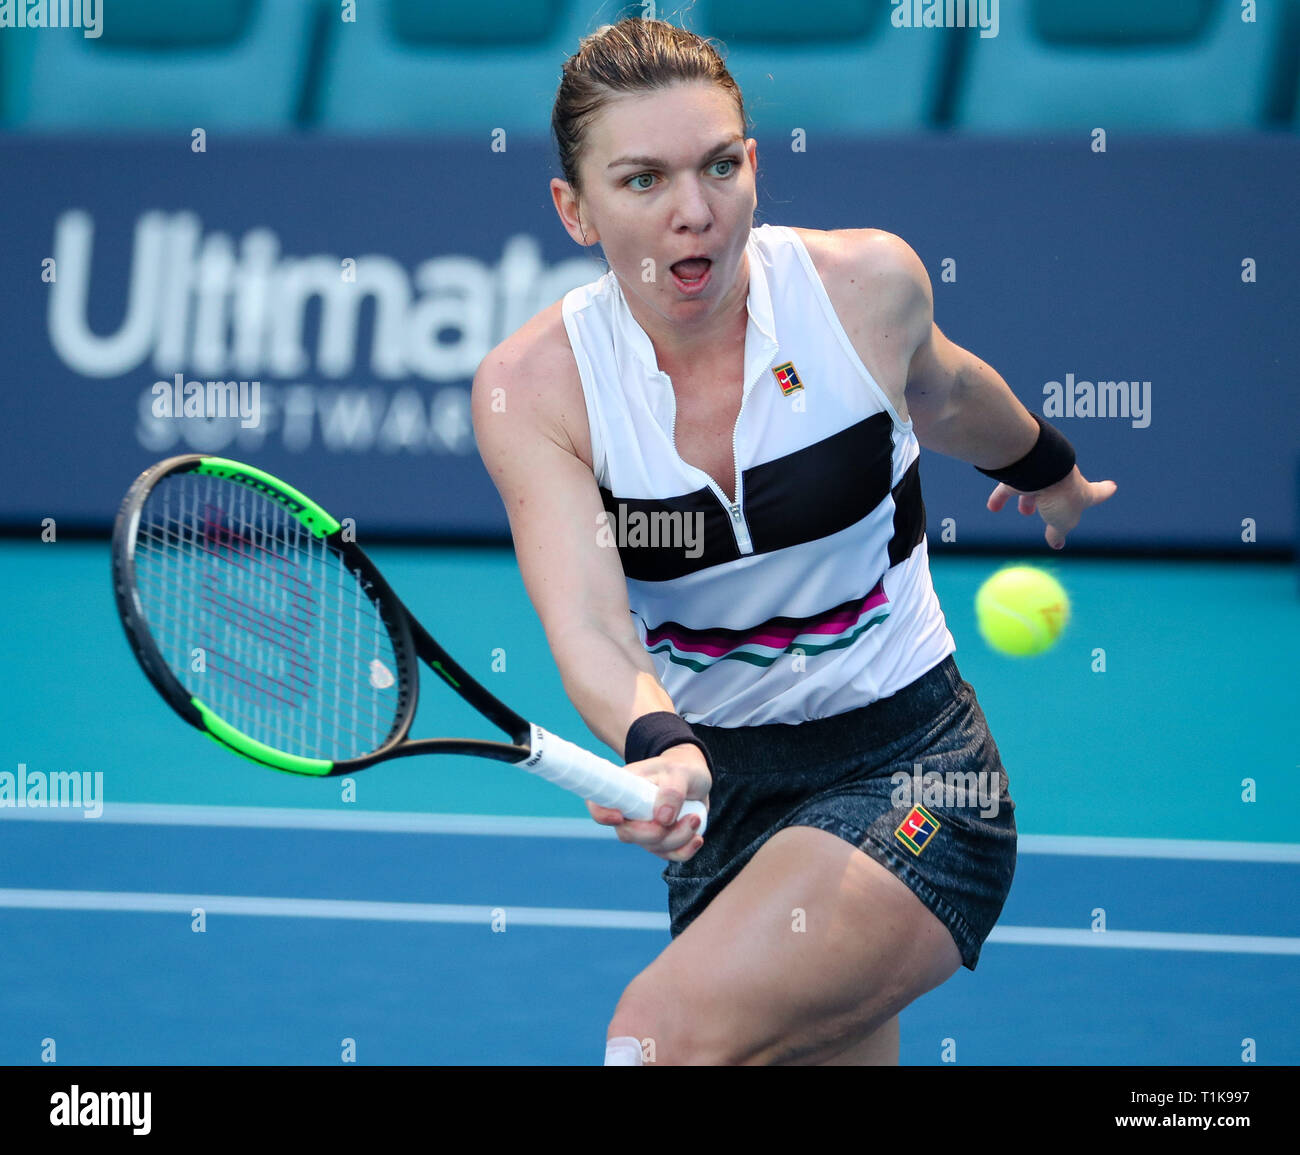 Miami Gardens, Florida, USA. 27th Mar, 2019. Simona Halep, of Romania, plays a volley against Qiang Wang, of China, during a quarter-finals match at the 2019 Miami Open Presented by Itau professional tennis tournament, played at the Hardrock Stadium in Miami Gardens, Florida, USA. Halep won 6-4, 7-5. Mario Houben/CSM/Alamy Live News Stock Photo